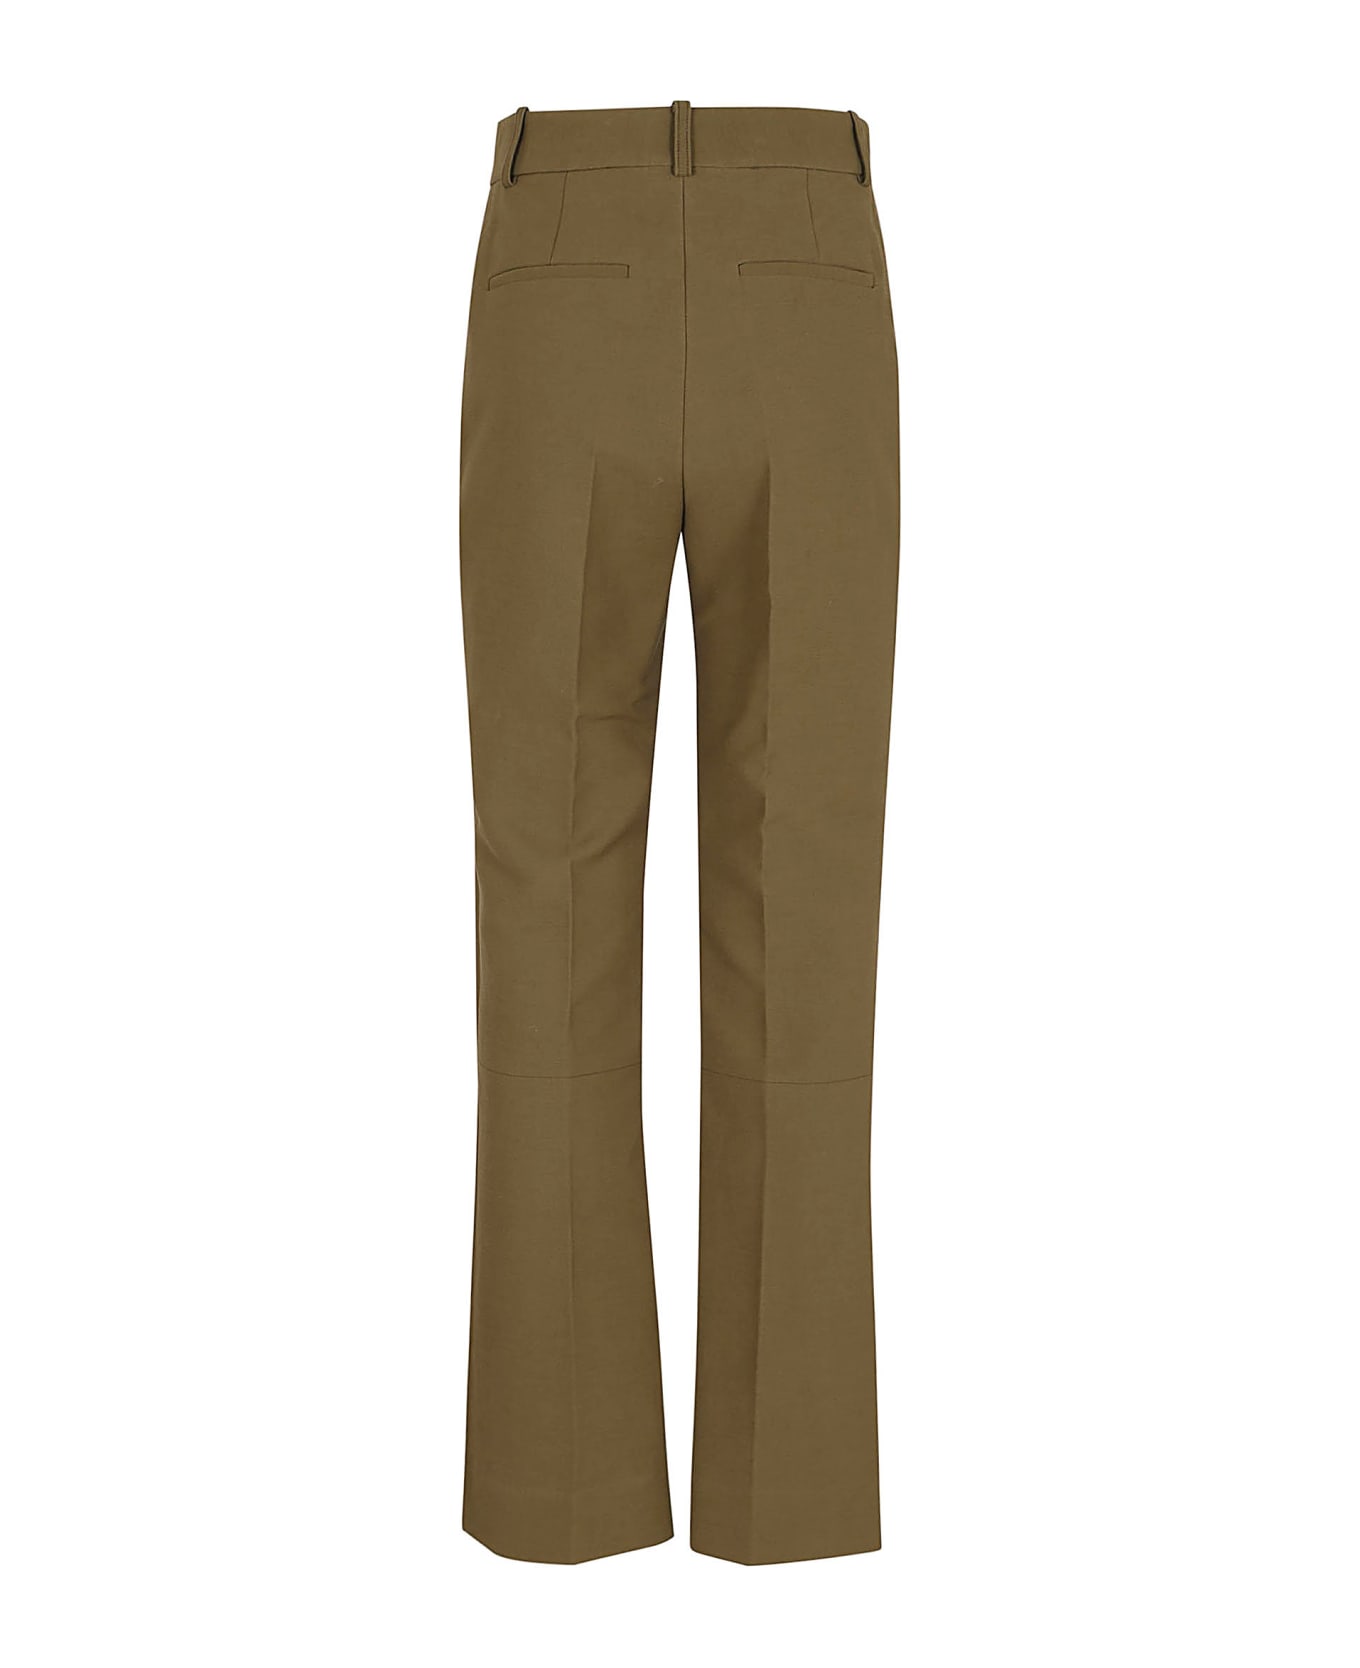 Victoria Beckham Cropped Kick Trousers - Seaweed ボトムス